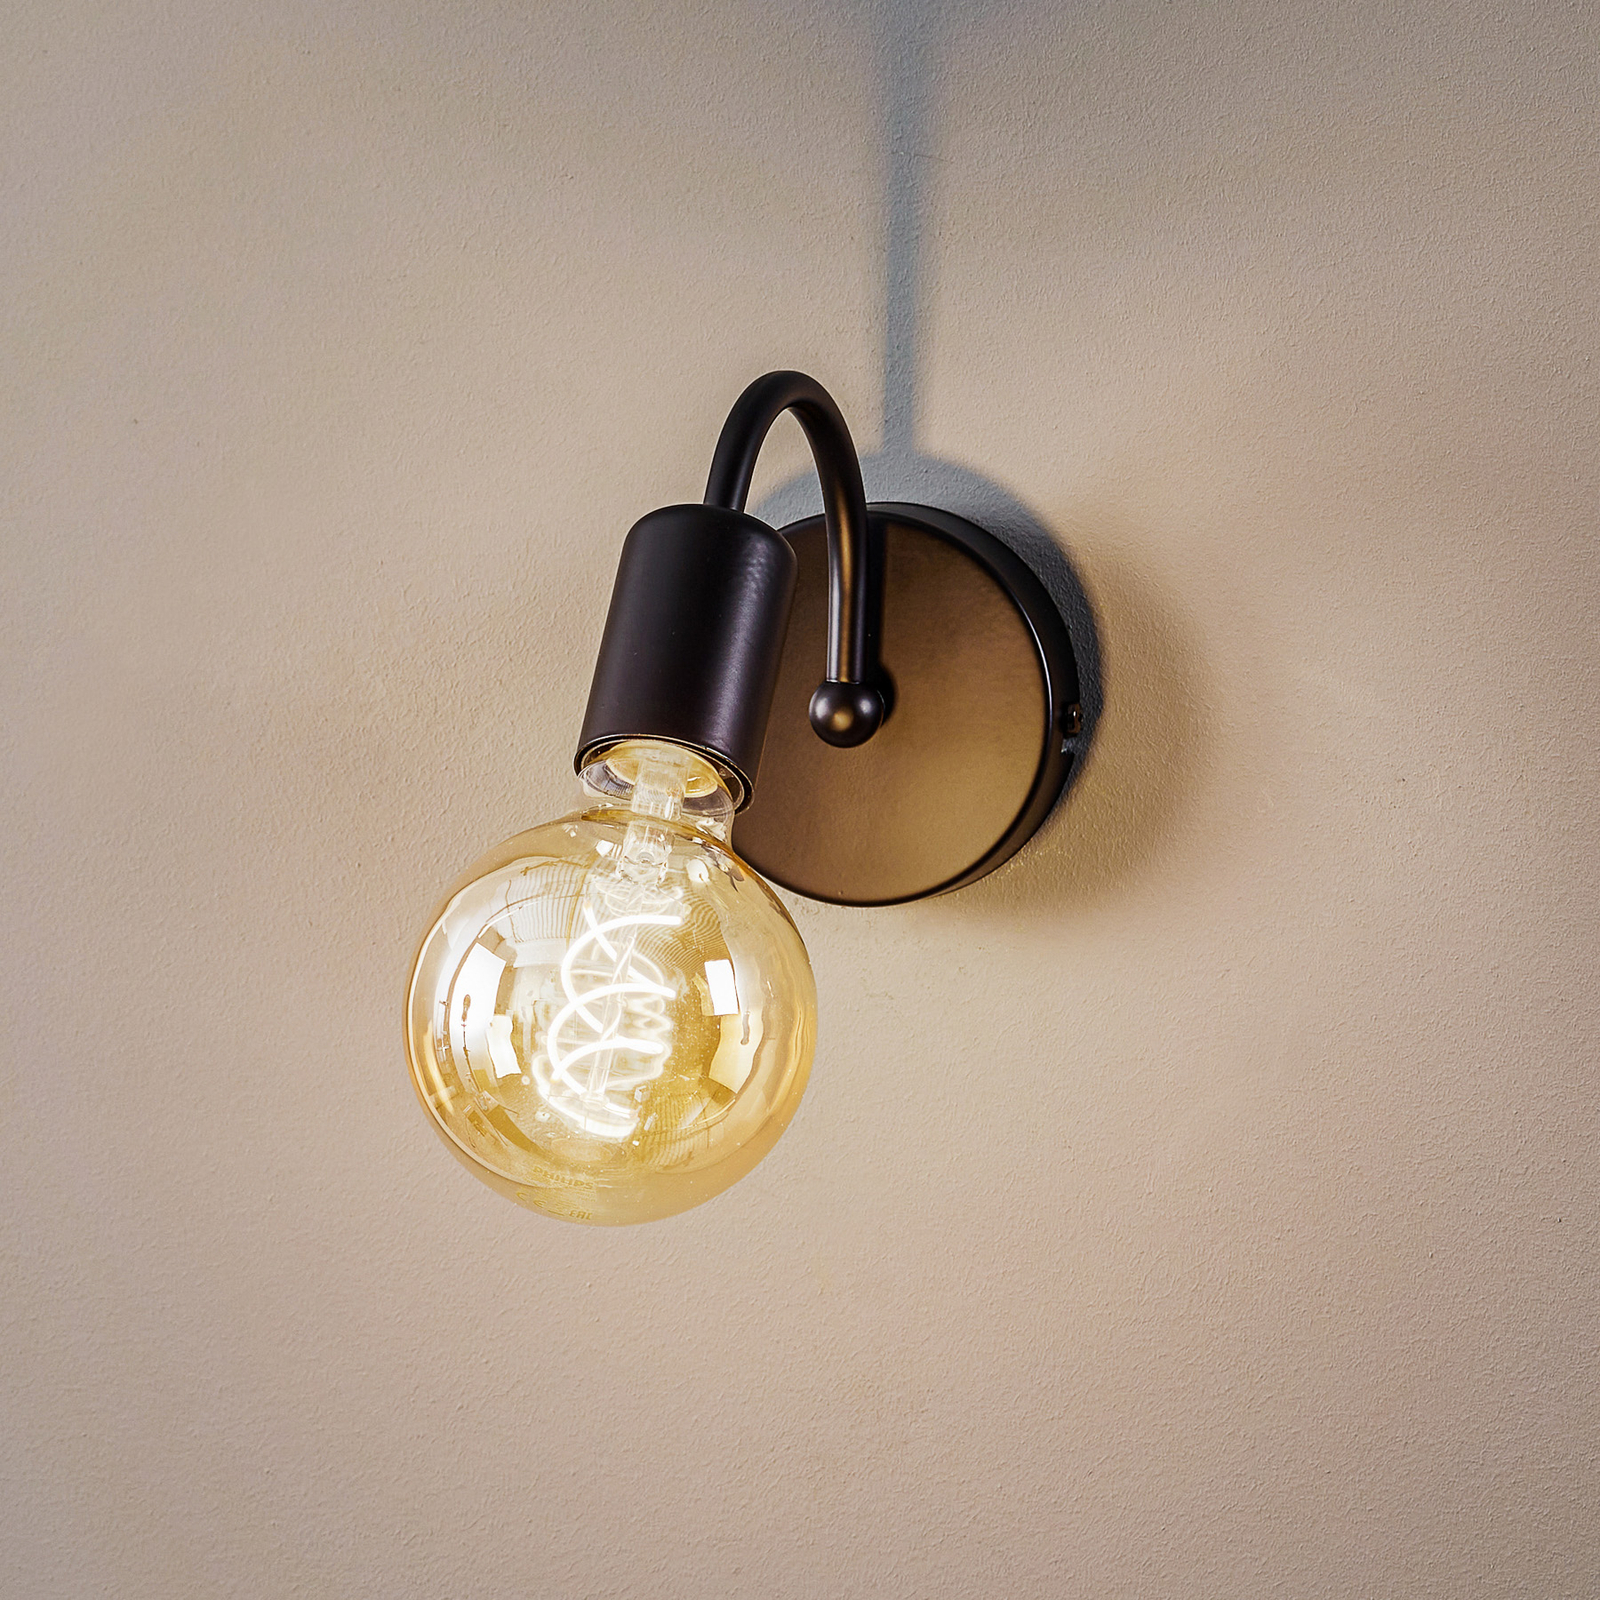 Milo wall light in black without lampshade